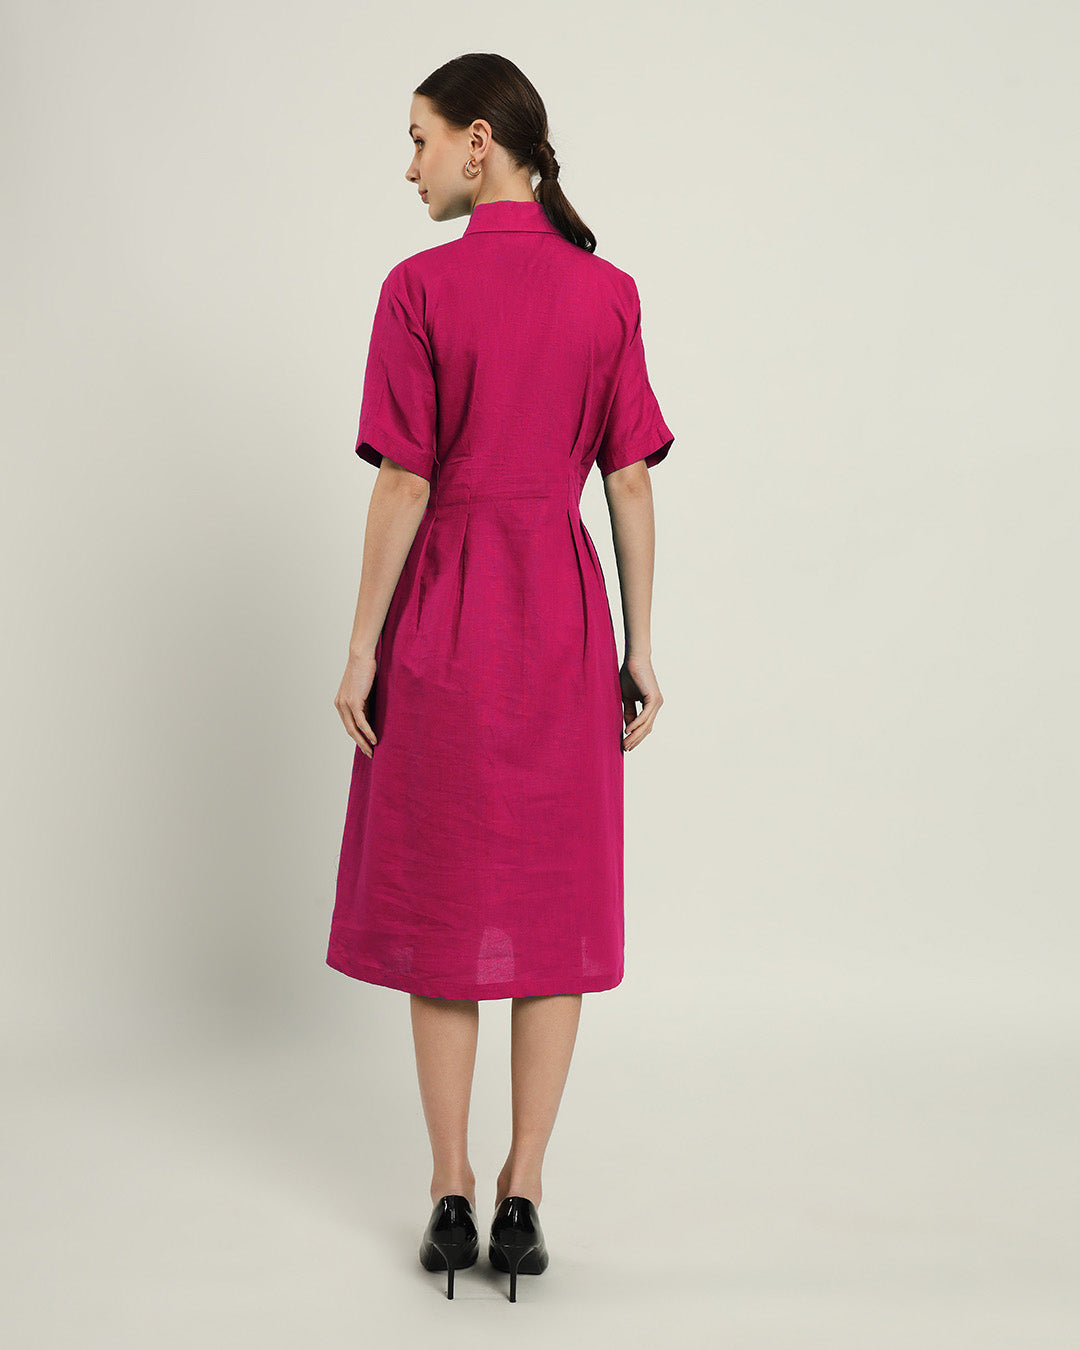 The Salford Berry Dress